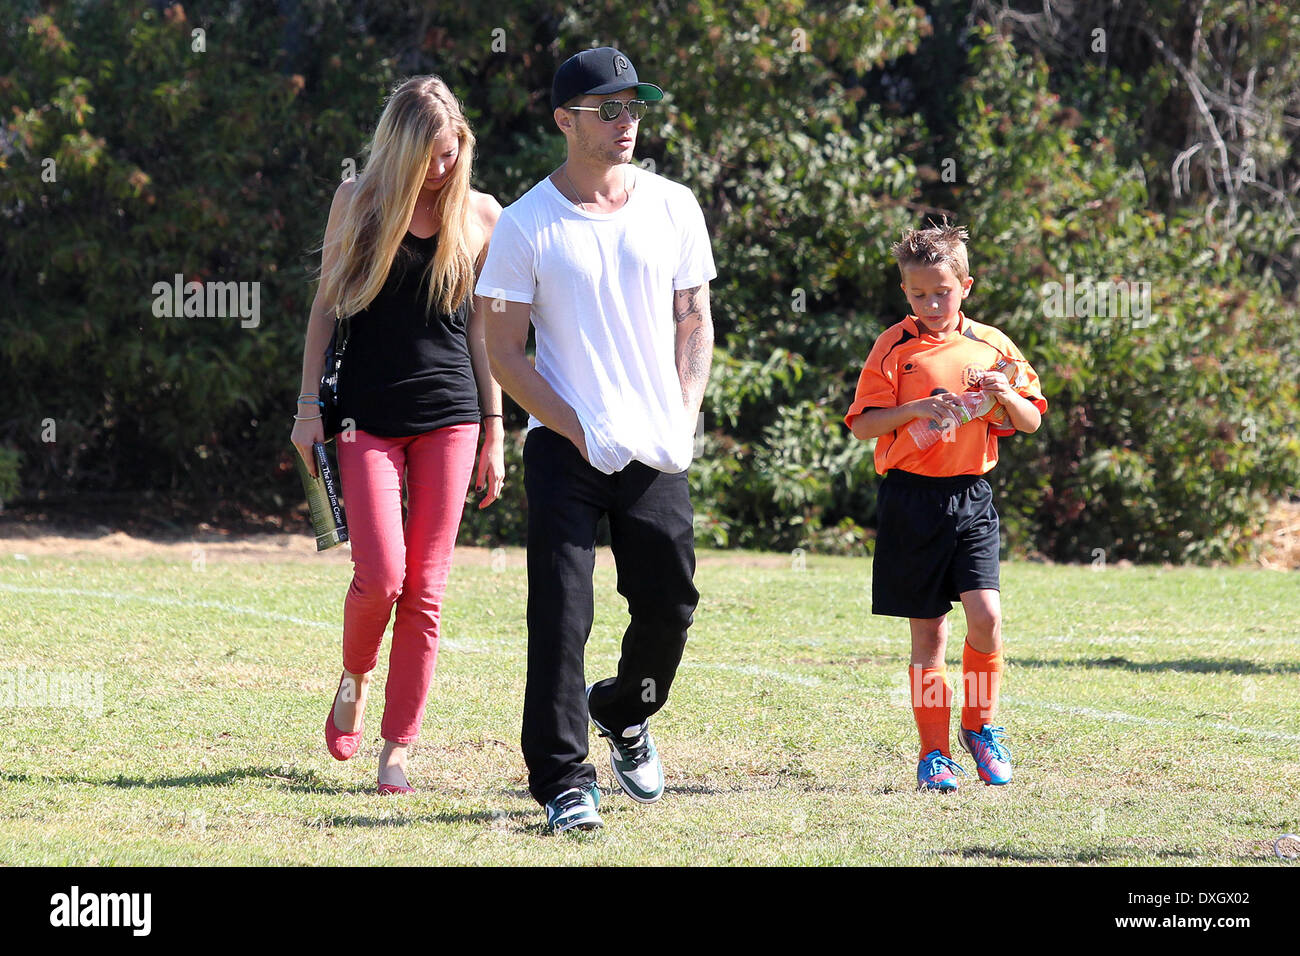 Paulina Slagter, Ryan Phillippe and Deacon Phillippe Ryan Phillippe at a park in Brentwood with his girlfriend to watch his son's soccer game Los Angeles, California - 03.11.12 Featuring: Paulina Slagter,Ryan Phillippe and Deacon Phillippe When: 03 Nov 2012 Stock Photo